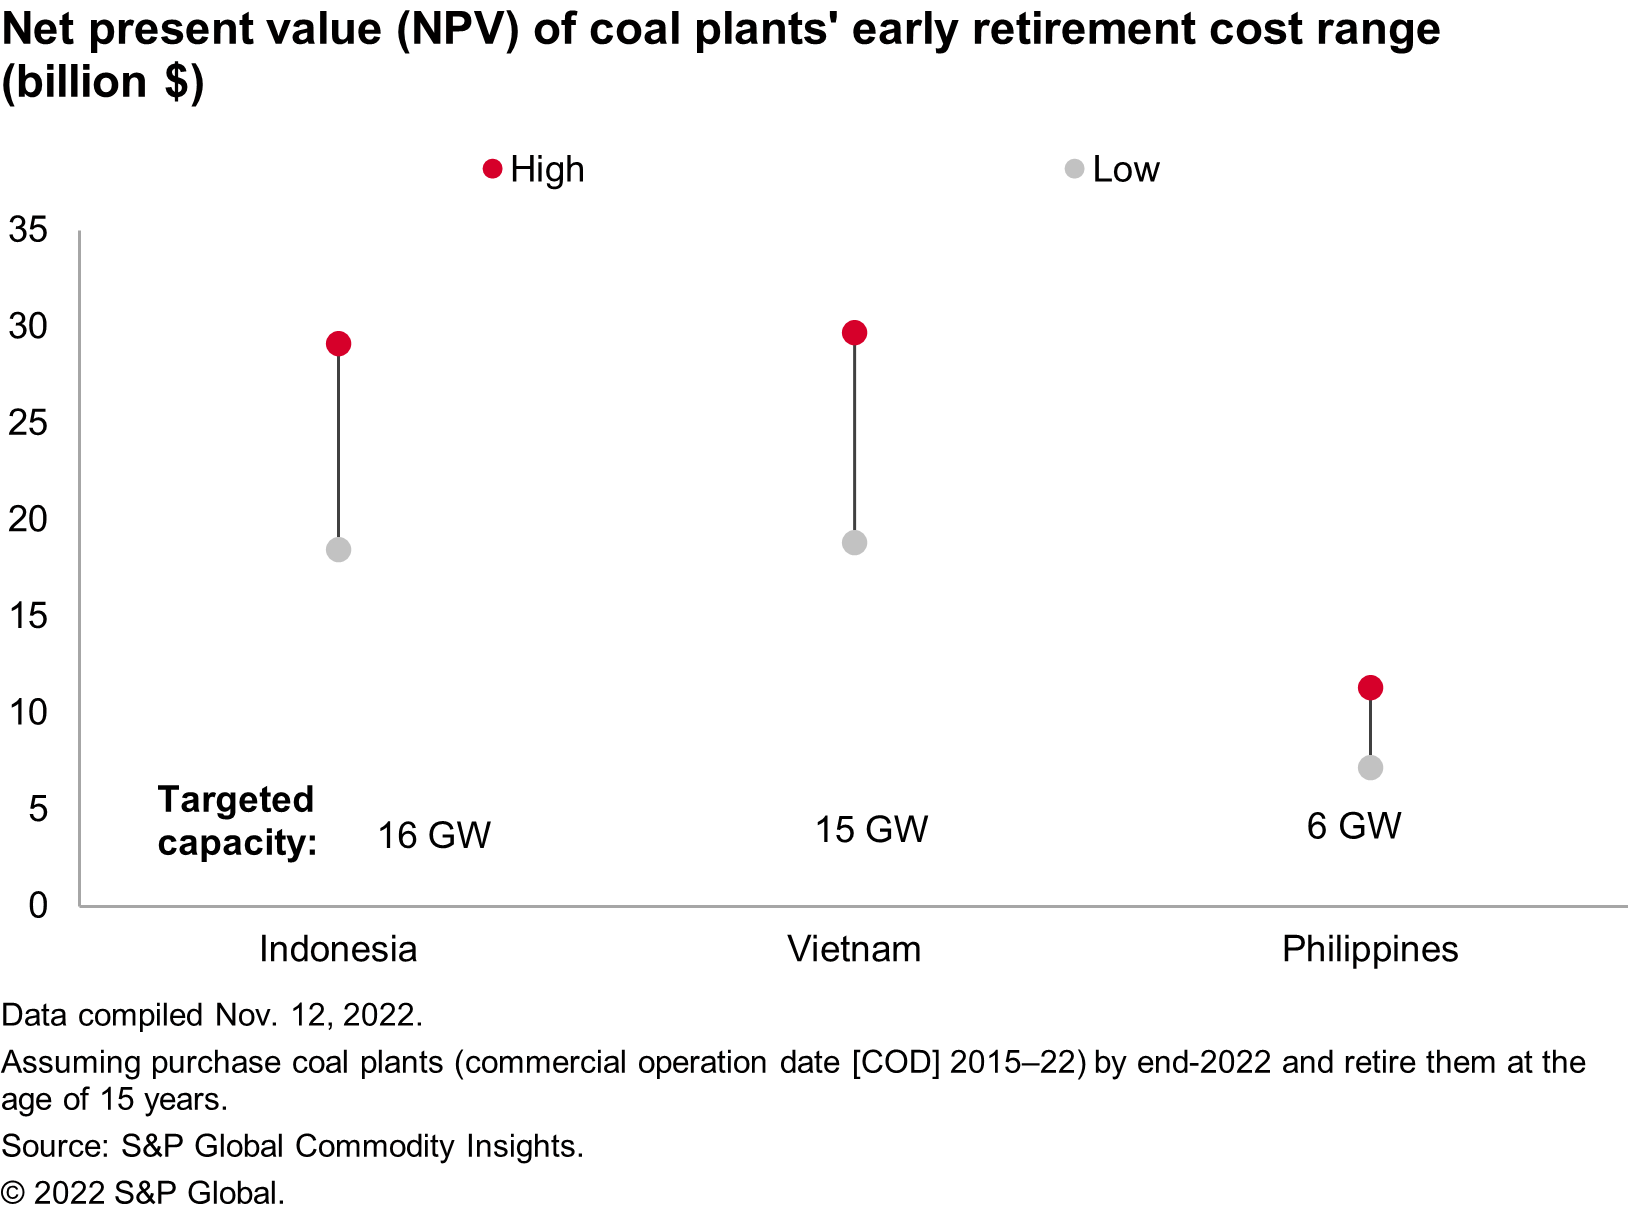 Net present value (NPV) of coal plants' early retirement cost